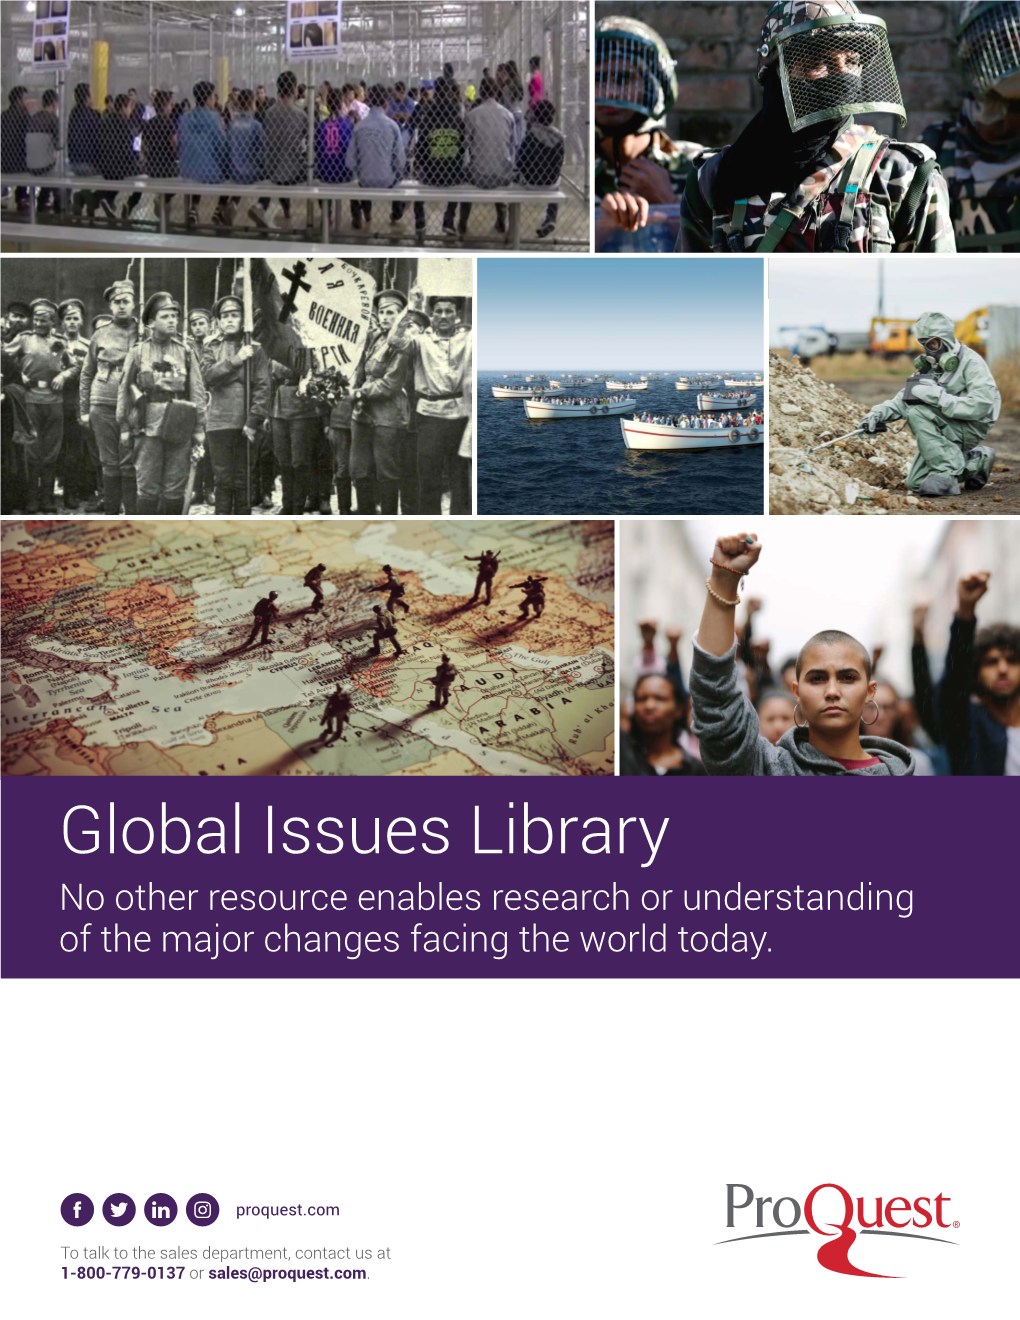 Global Issues Library No Other Resource Enables Research Or Understanding of the Major Changes Facing the World Today